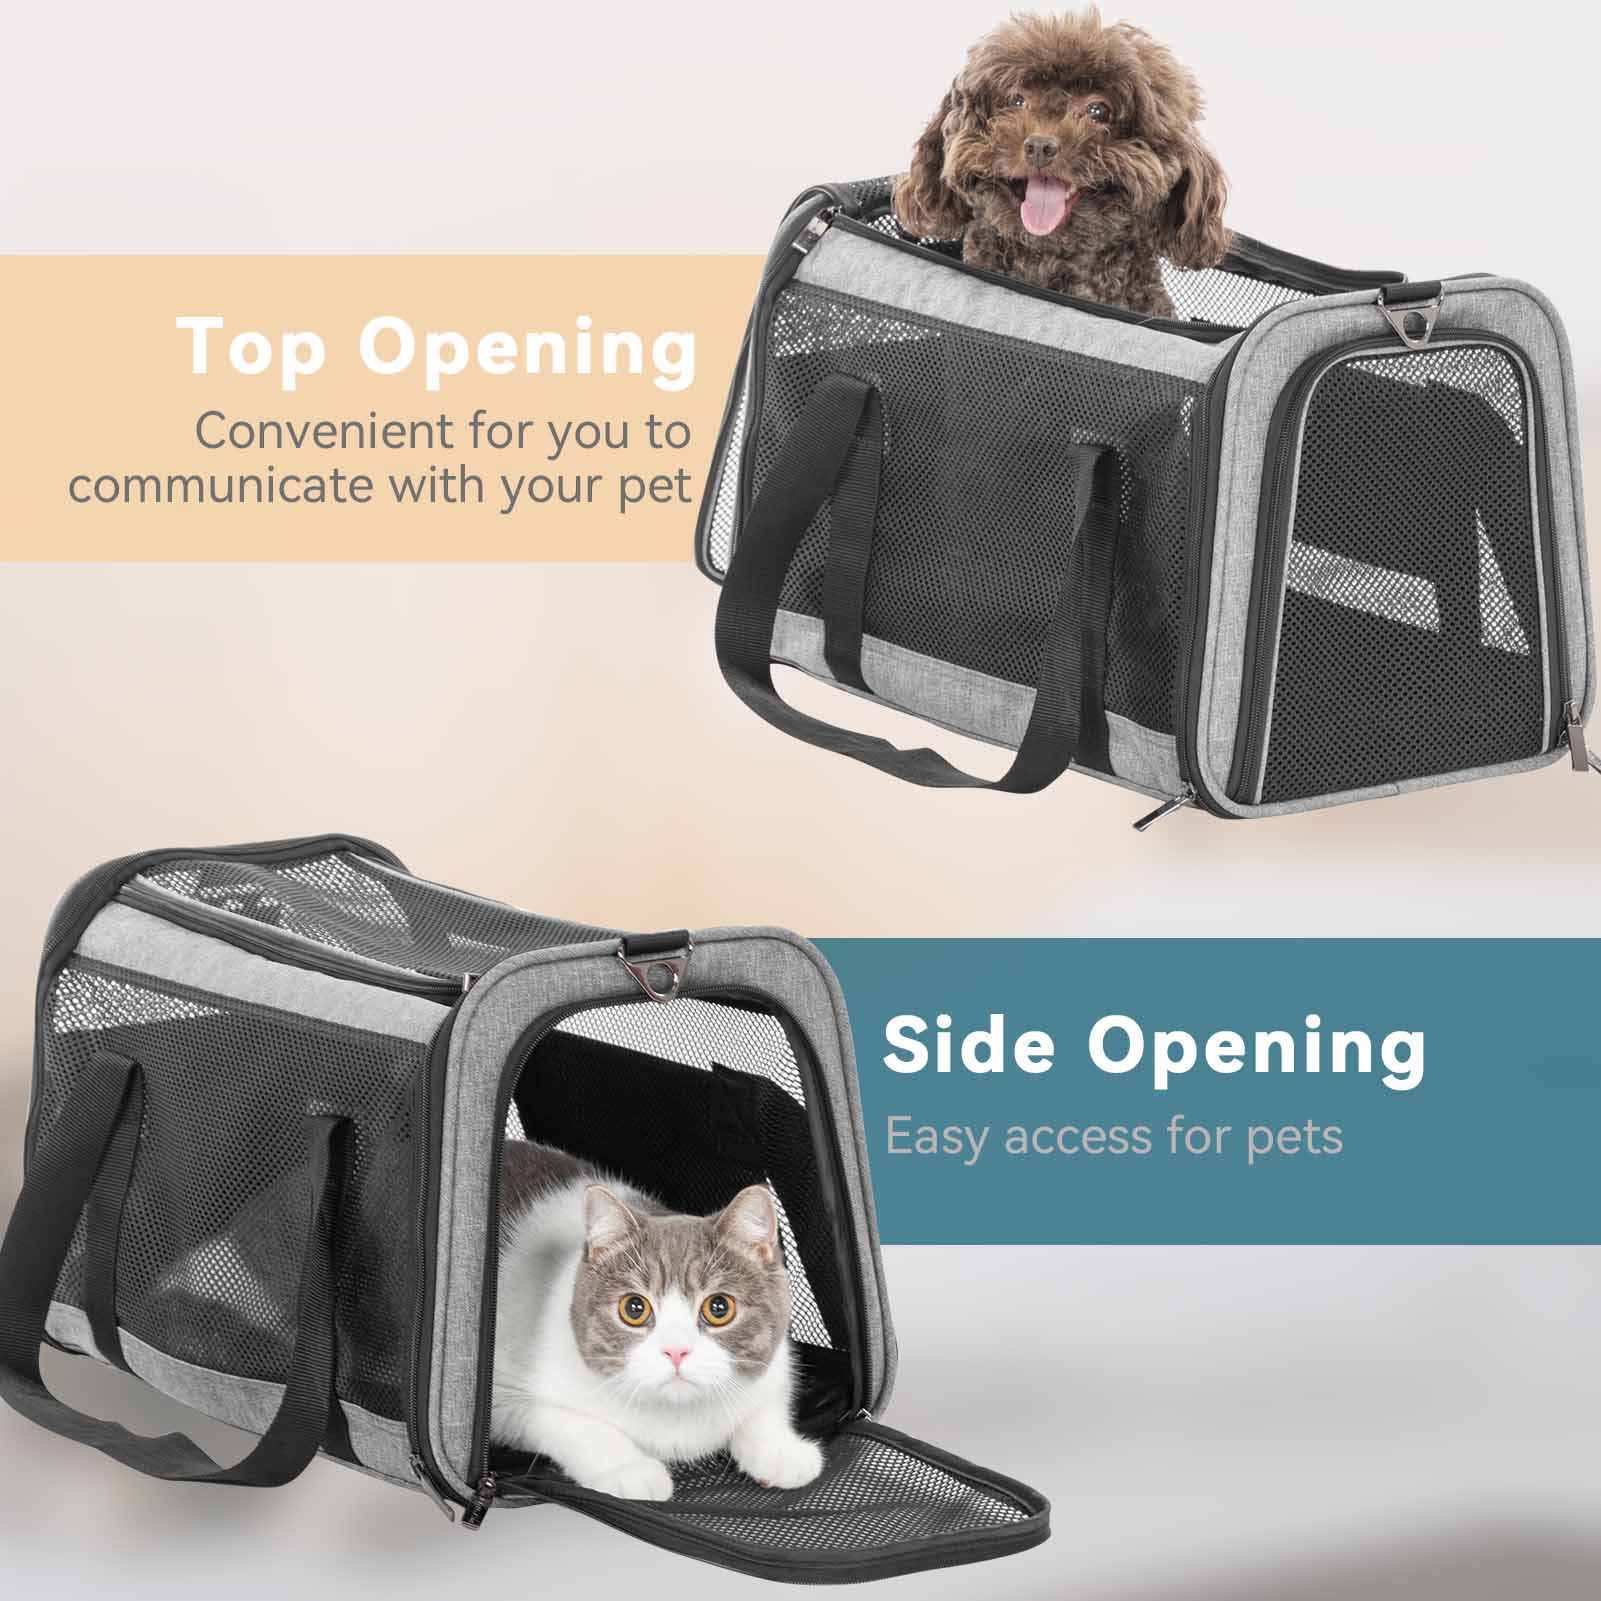 Soft Sided Pet Carrier Large Gray + Red 